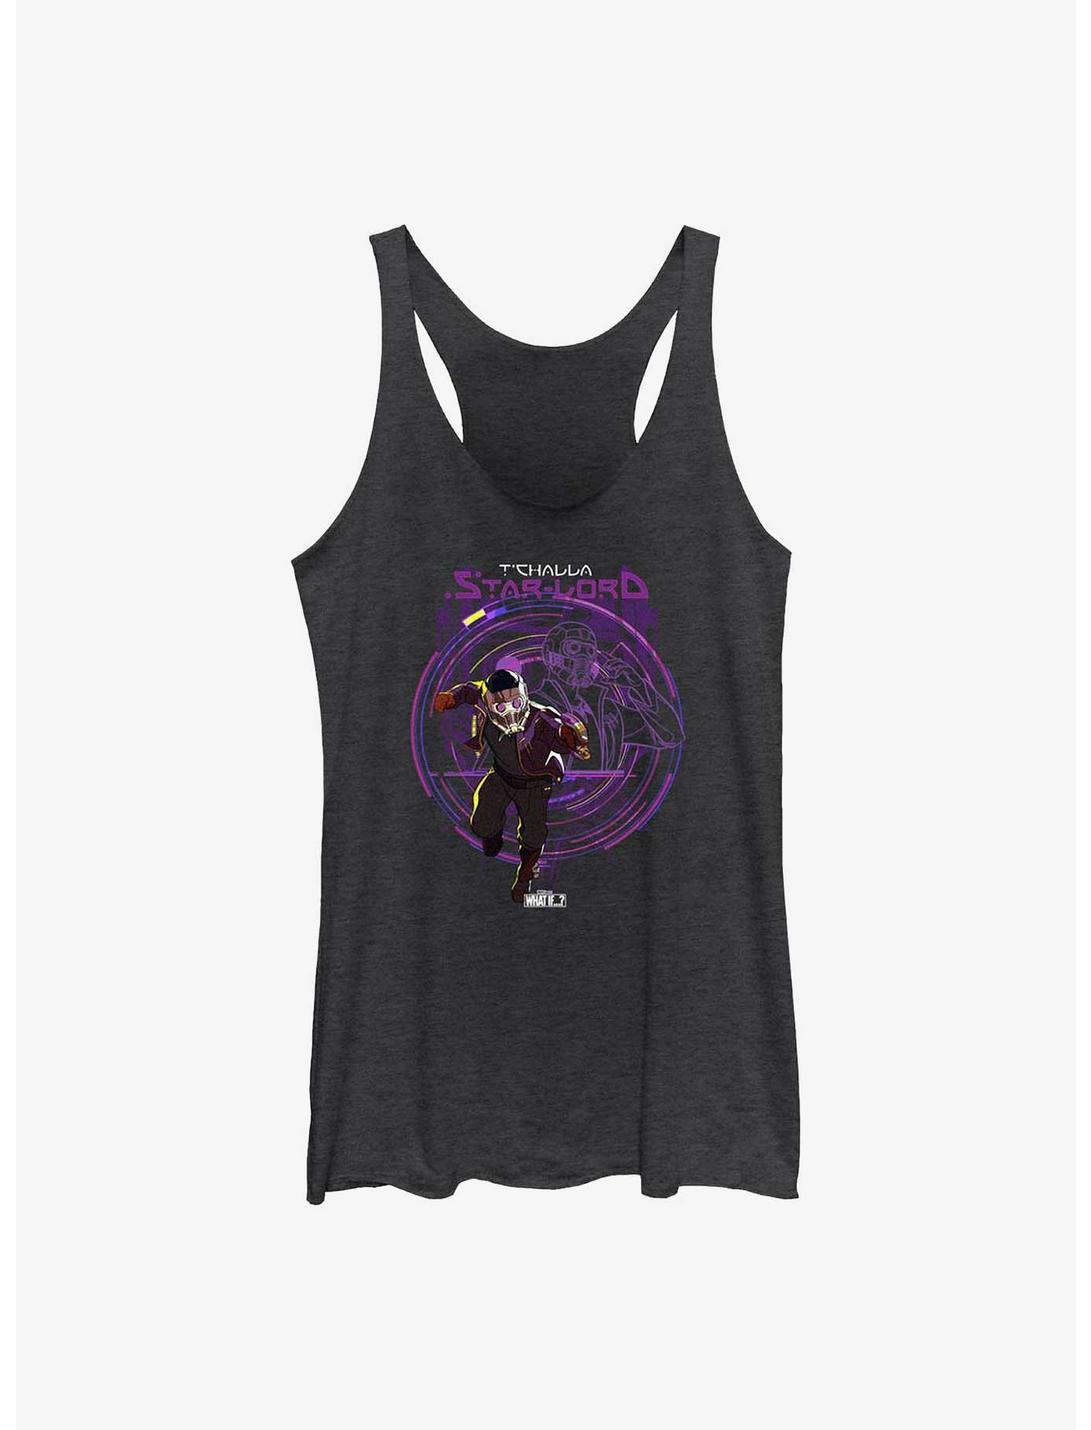 Marvel What If...? T'Challa Star-Lord Womens Tank Top, BLK HTR, hi-res